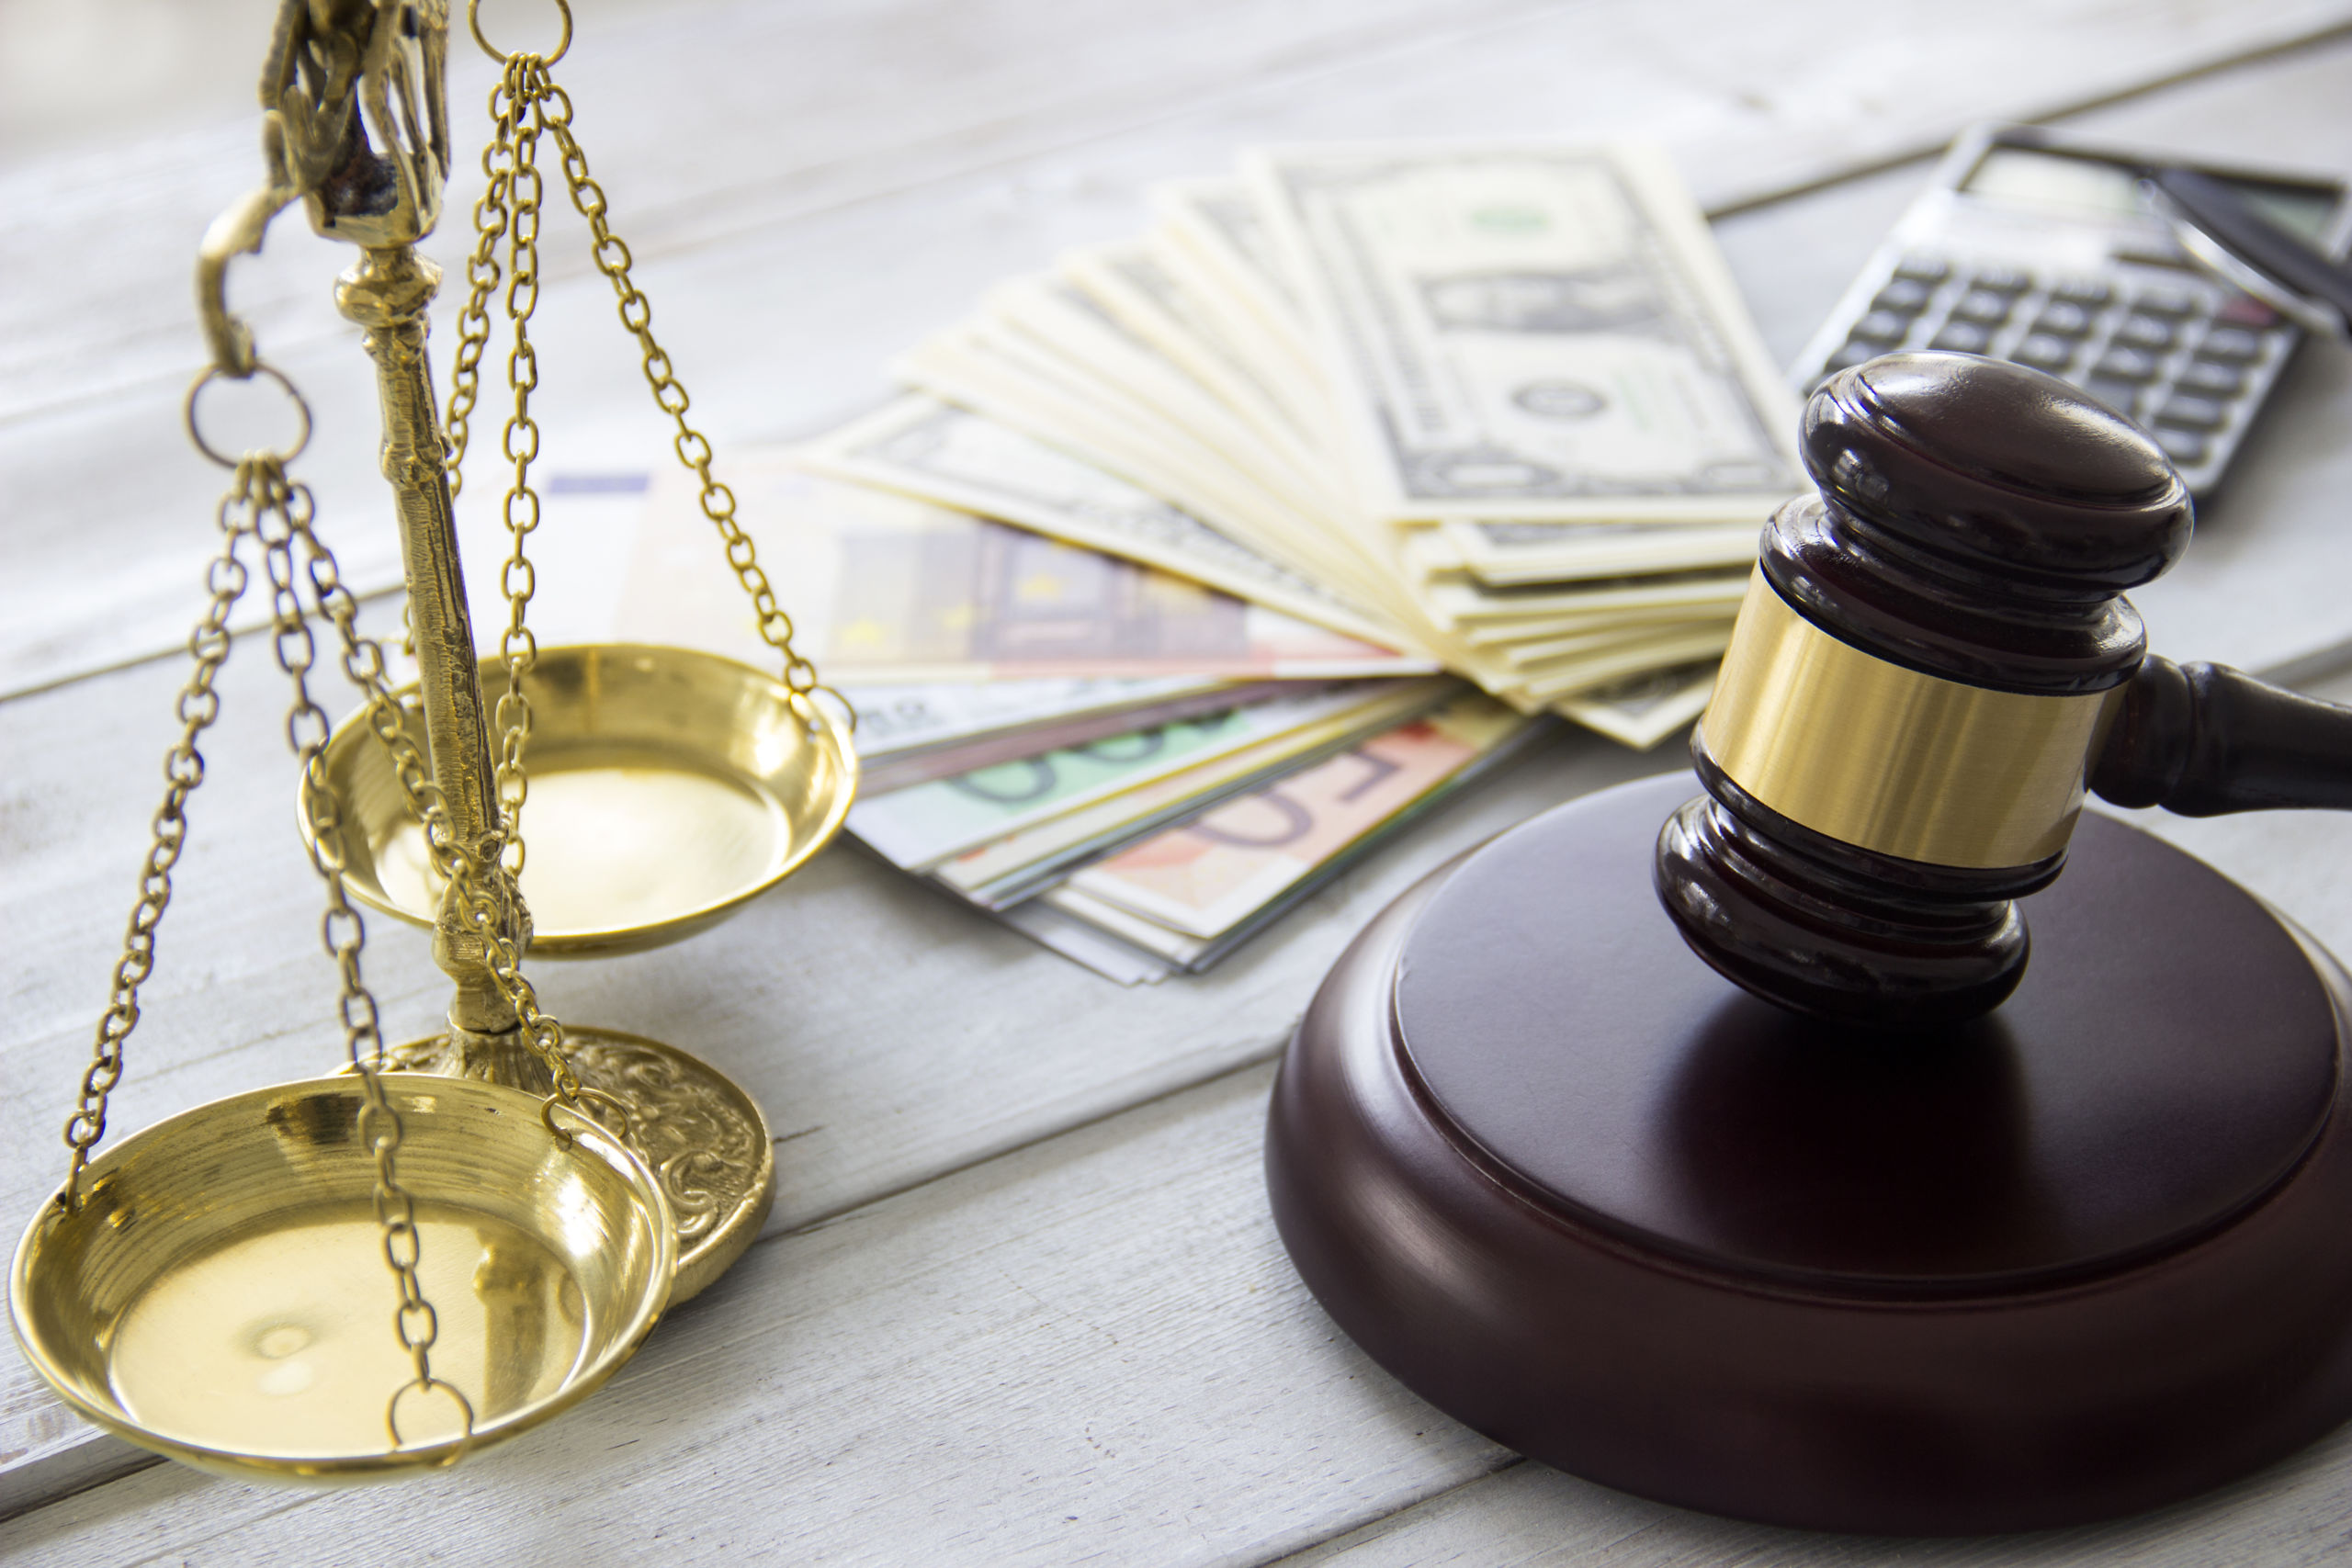 Accounting Fraud & SEC Investigations: Recent Enforcement Initiatives and Compliance Issues